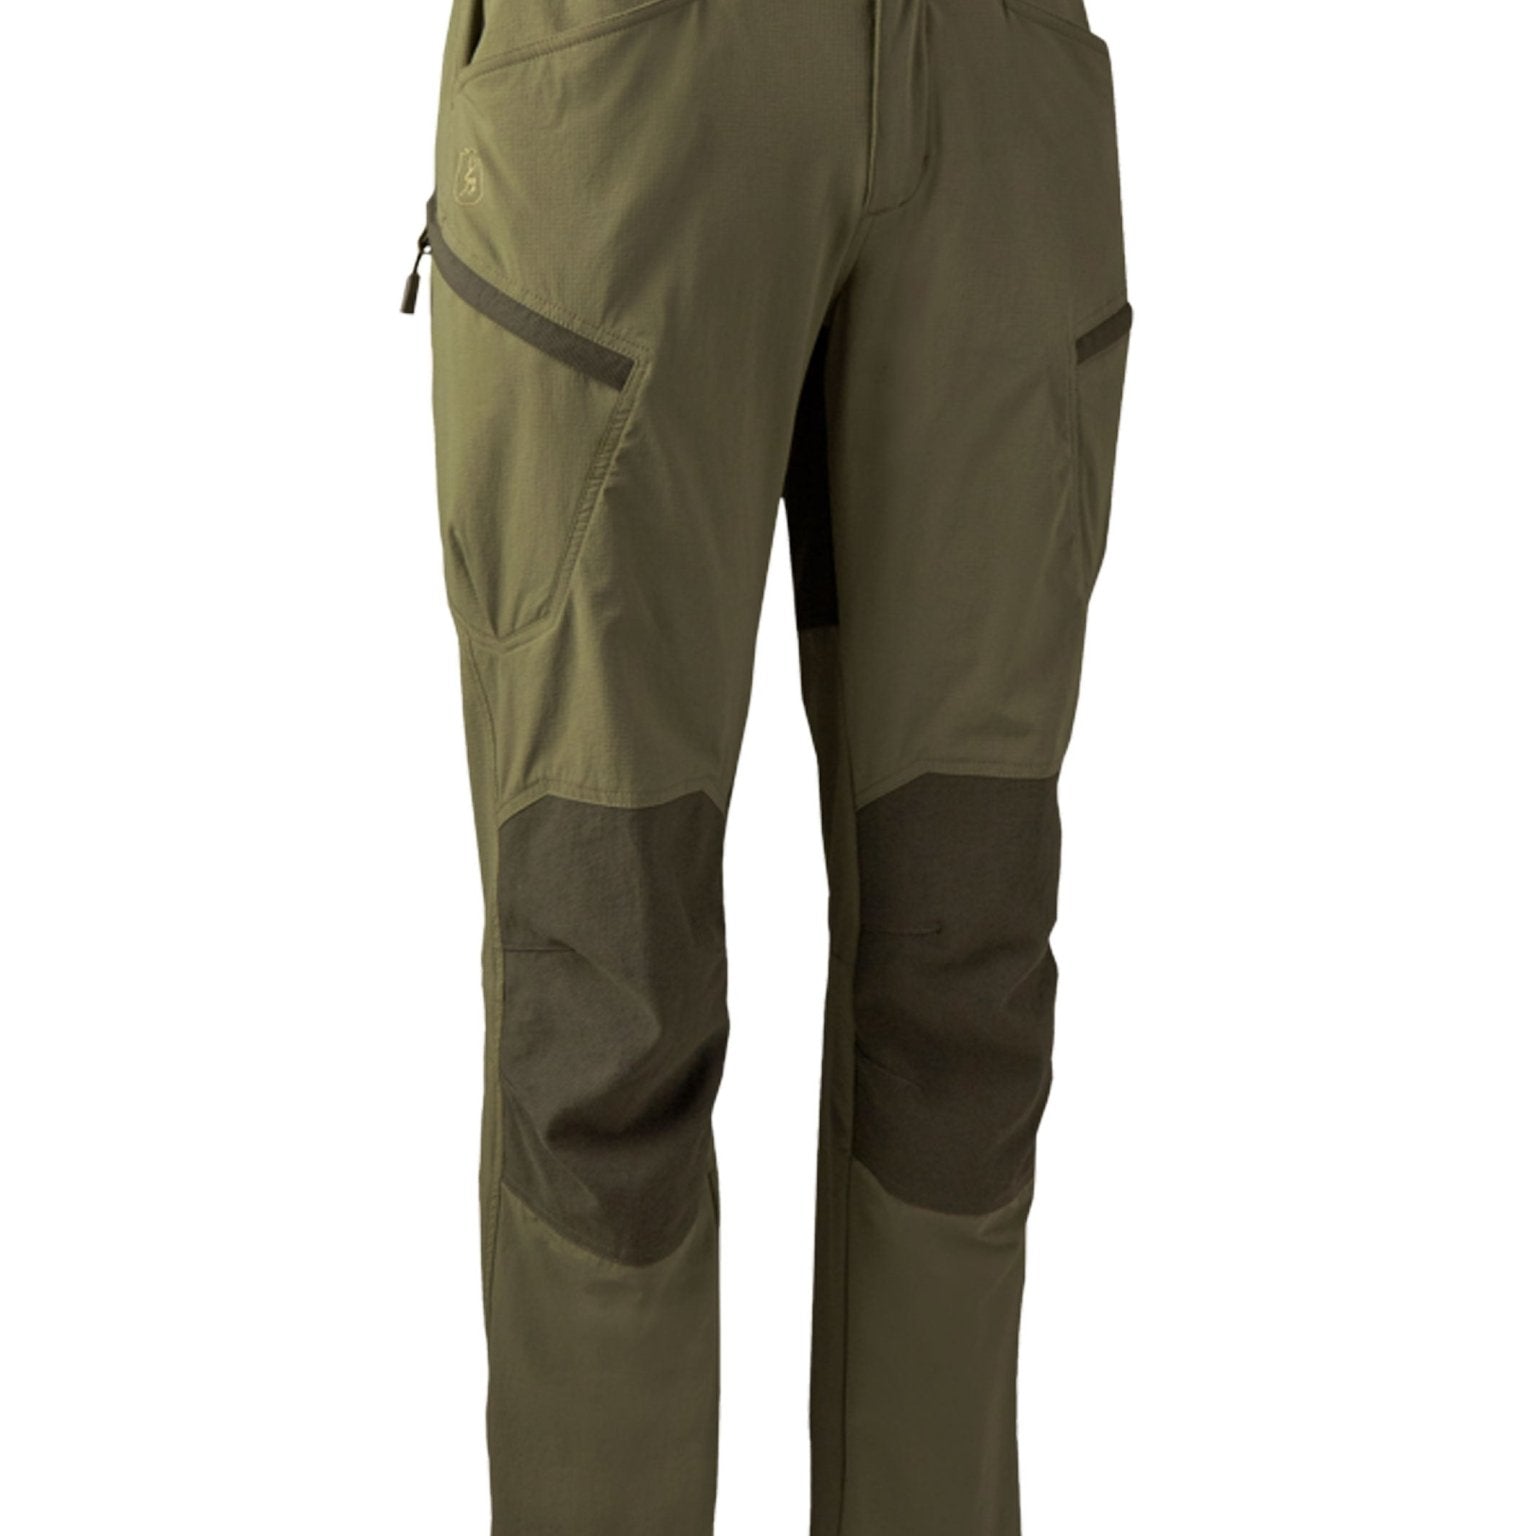 4elementsclothingDeerhunterDeerhunter - Anti Insect Trousers with HHL treatment - Water repellent & BreathableTrousers & Jeans3883-326-48